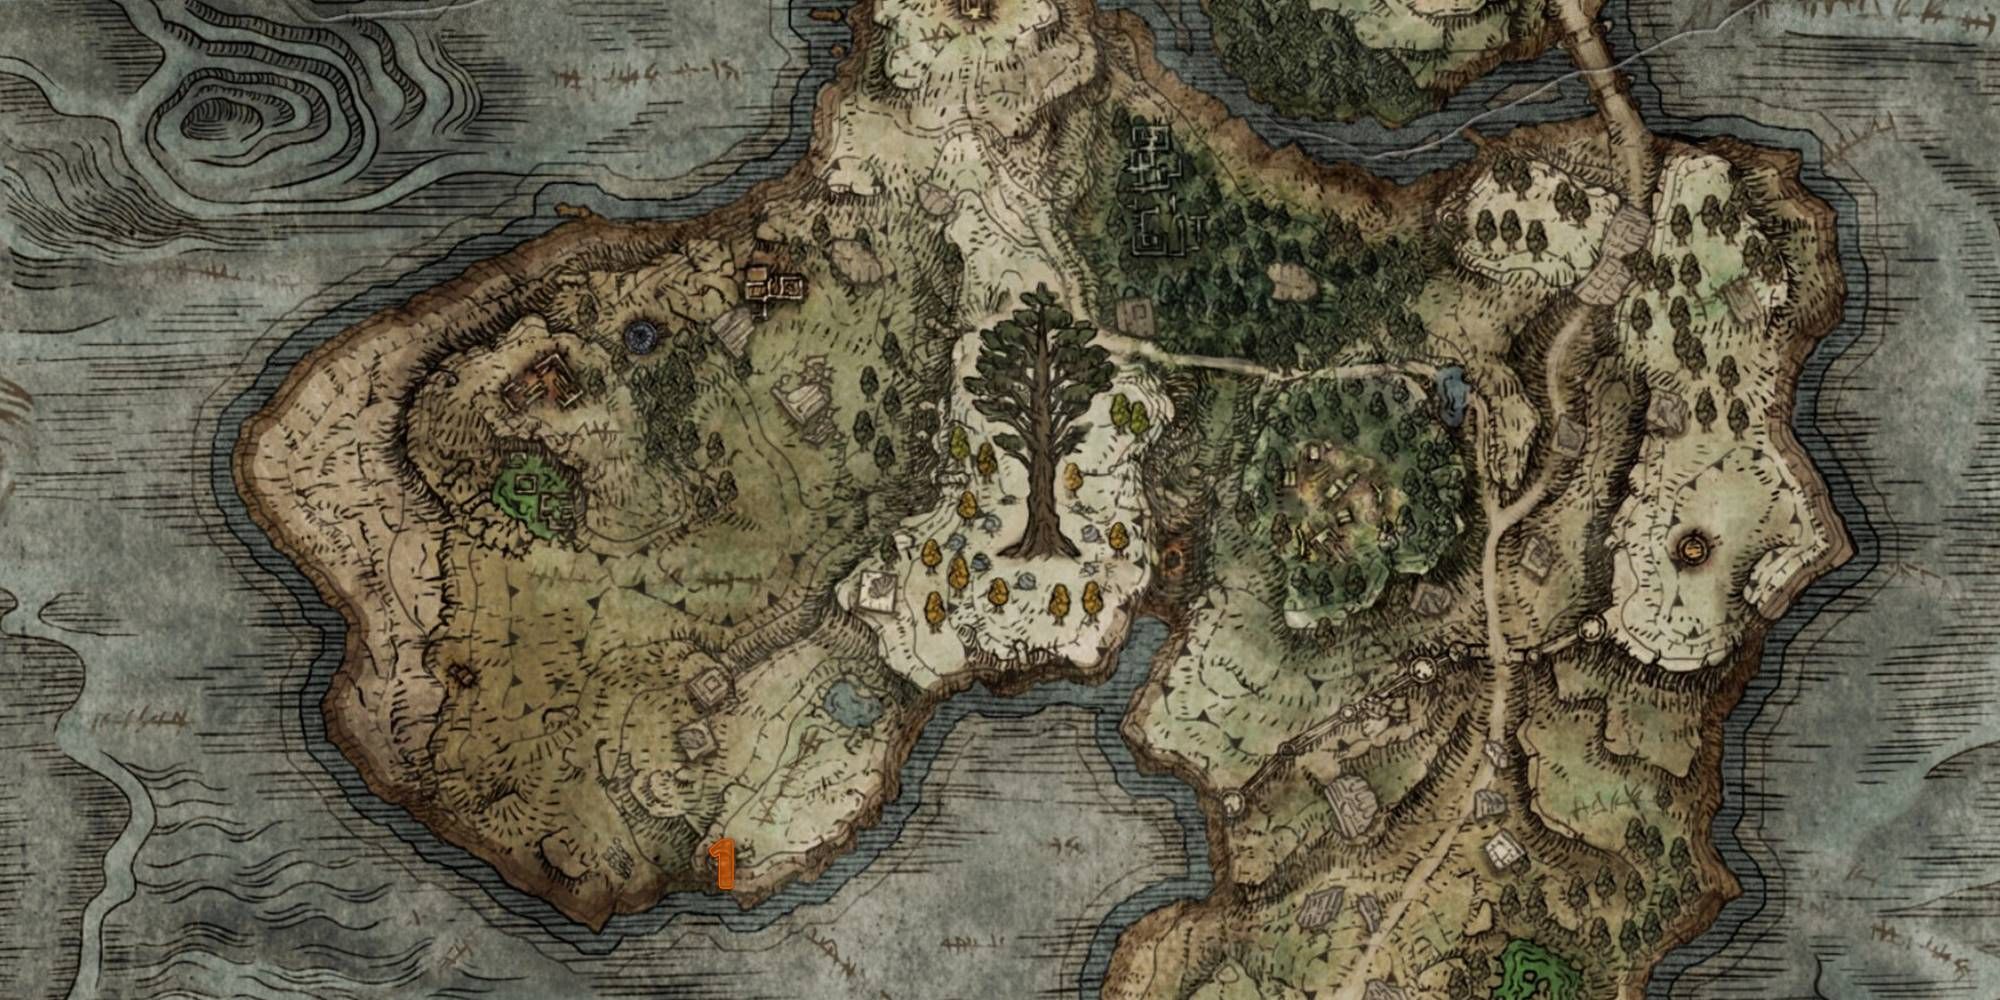 Elden Ring Teleport Map Weeping Peninsula with numbers